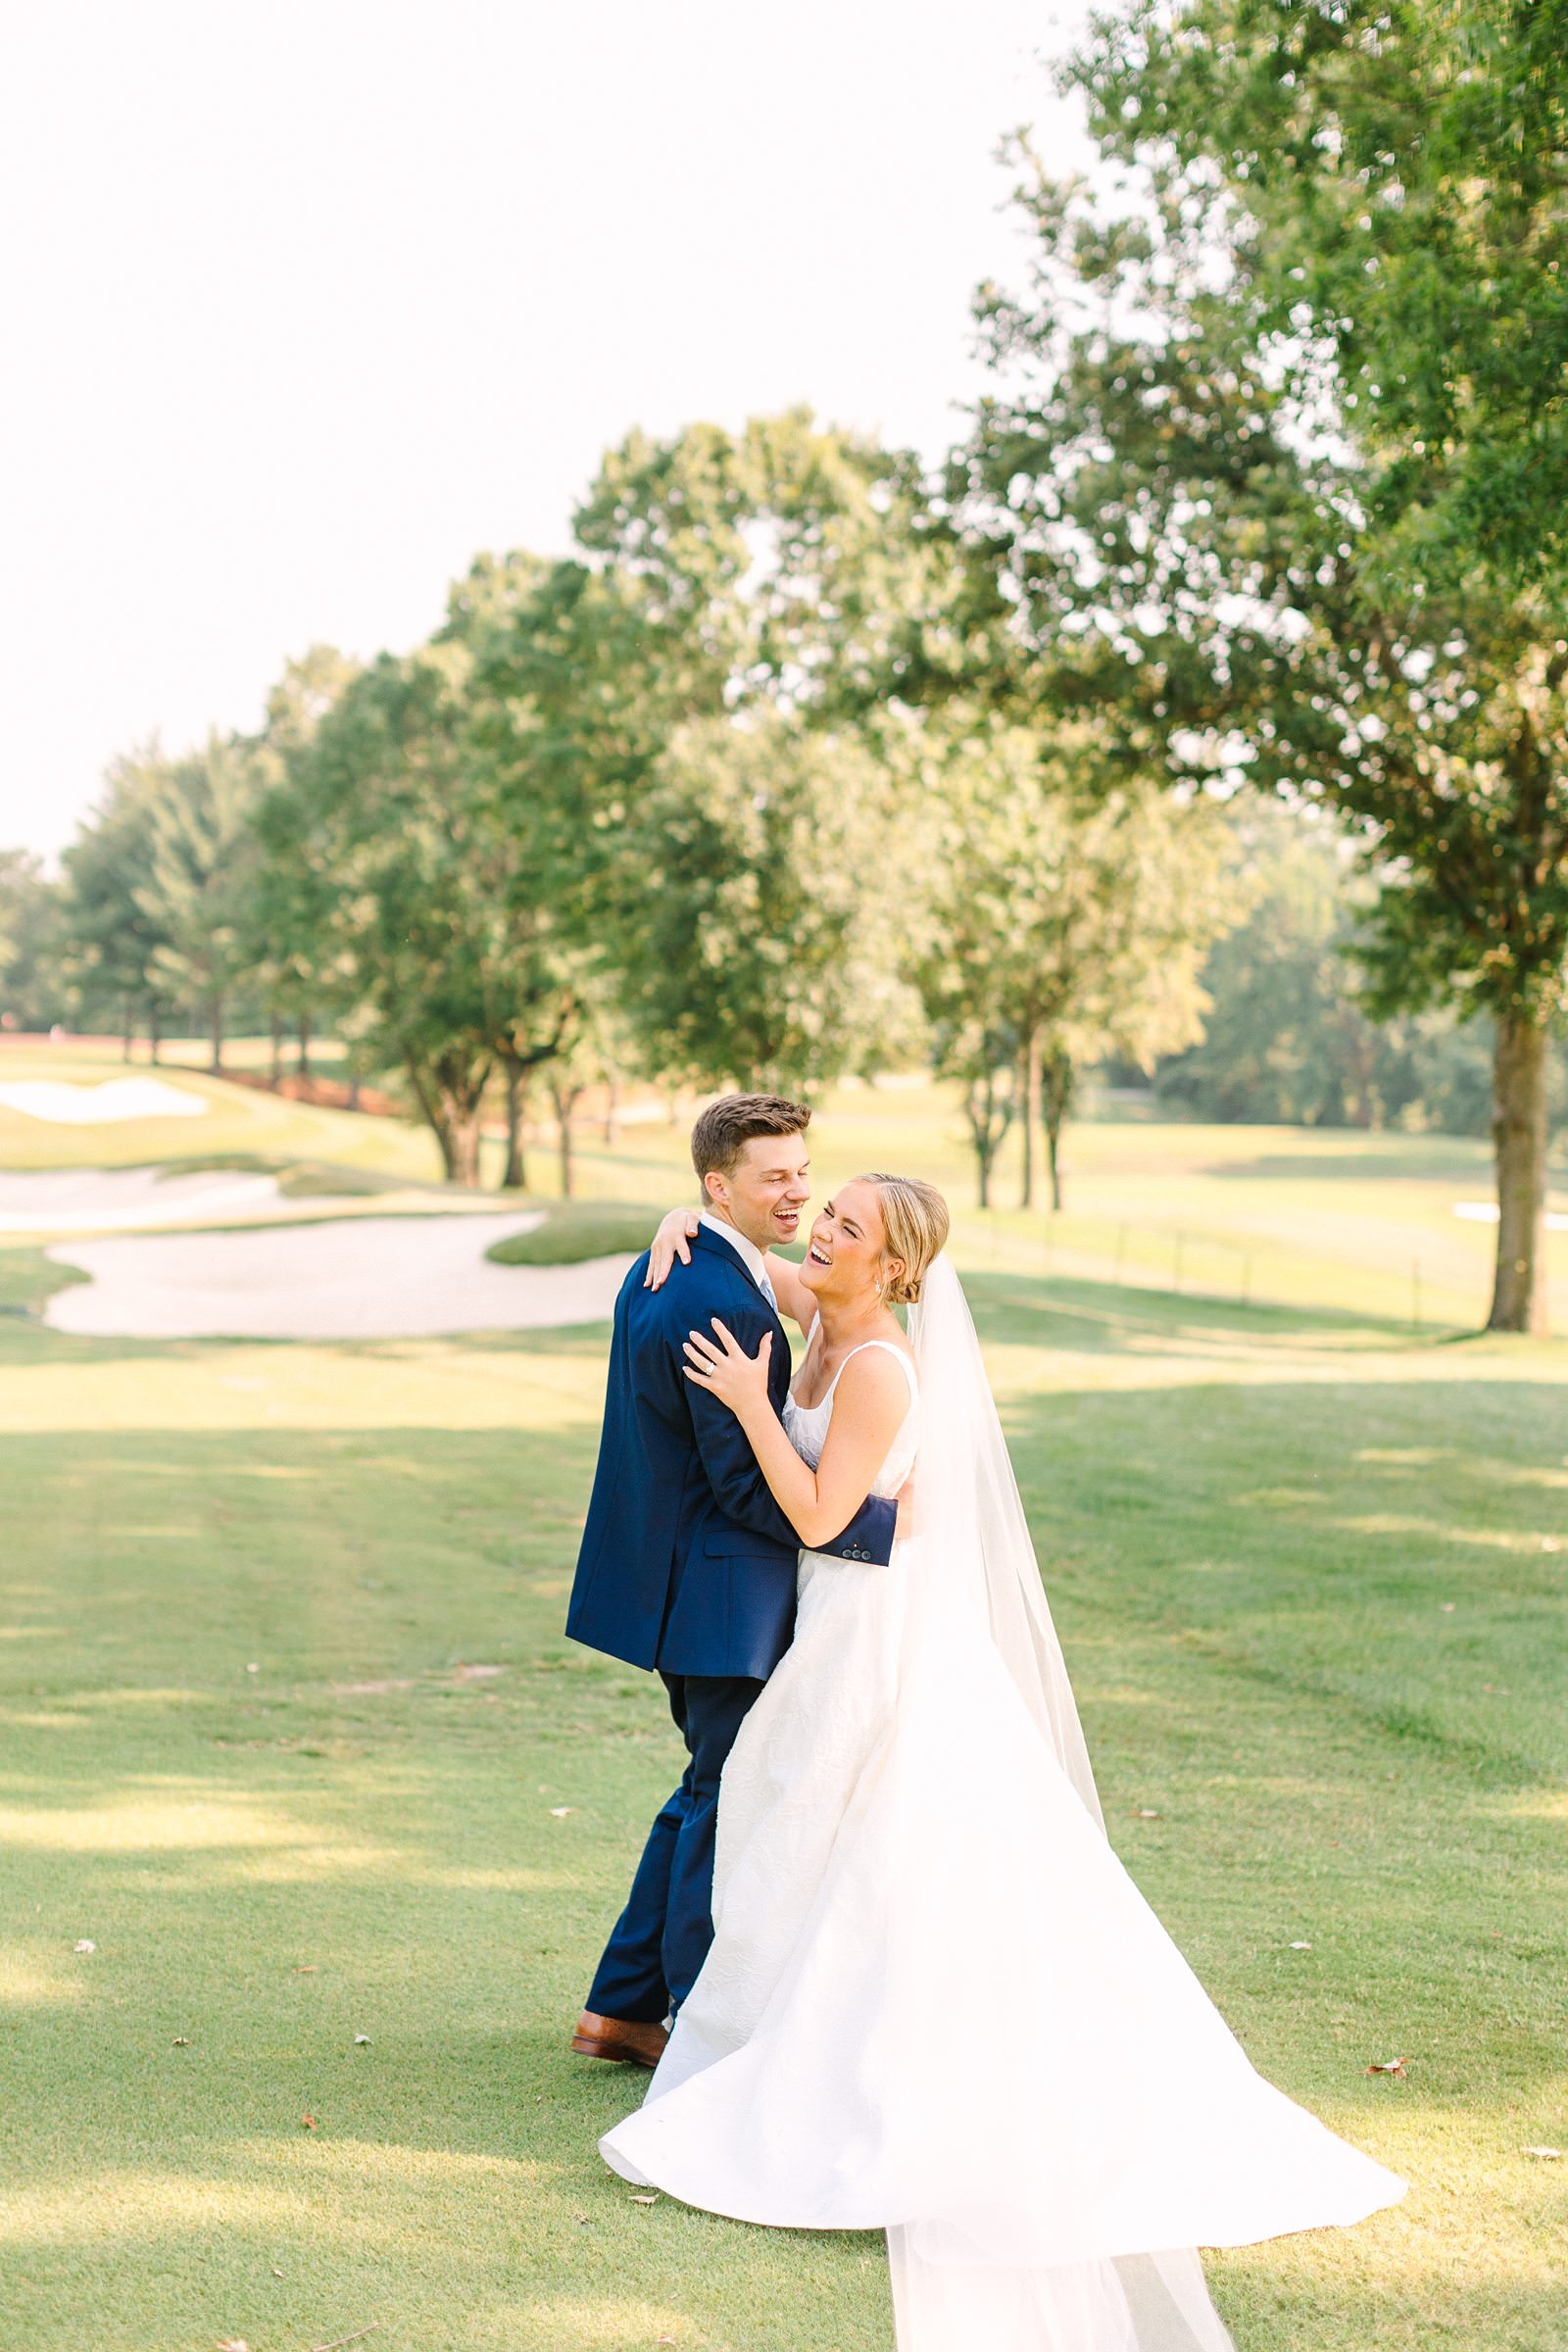 An Evansville Country Club Wedding | Ashley and Beau | Bret and Brandie Photography171.jpg